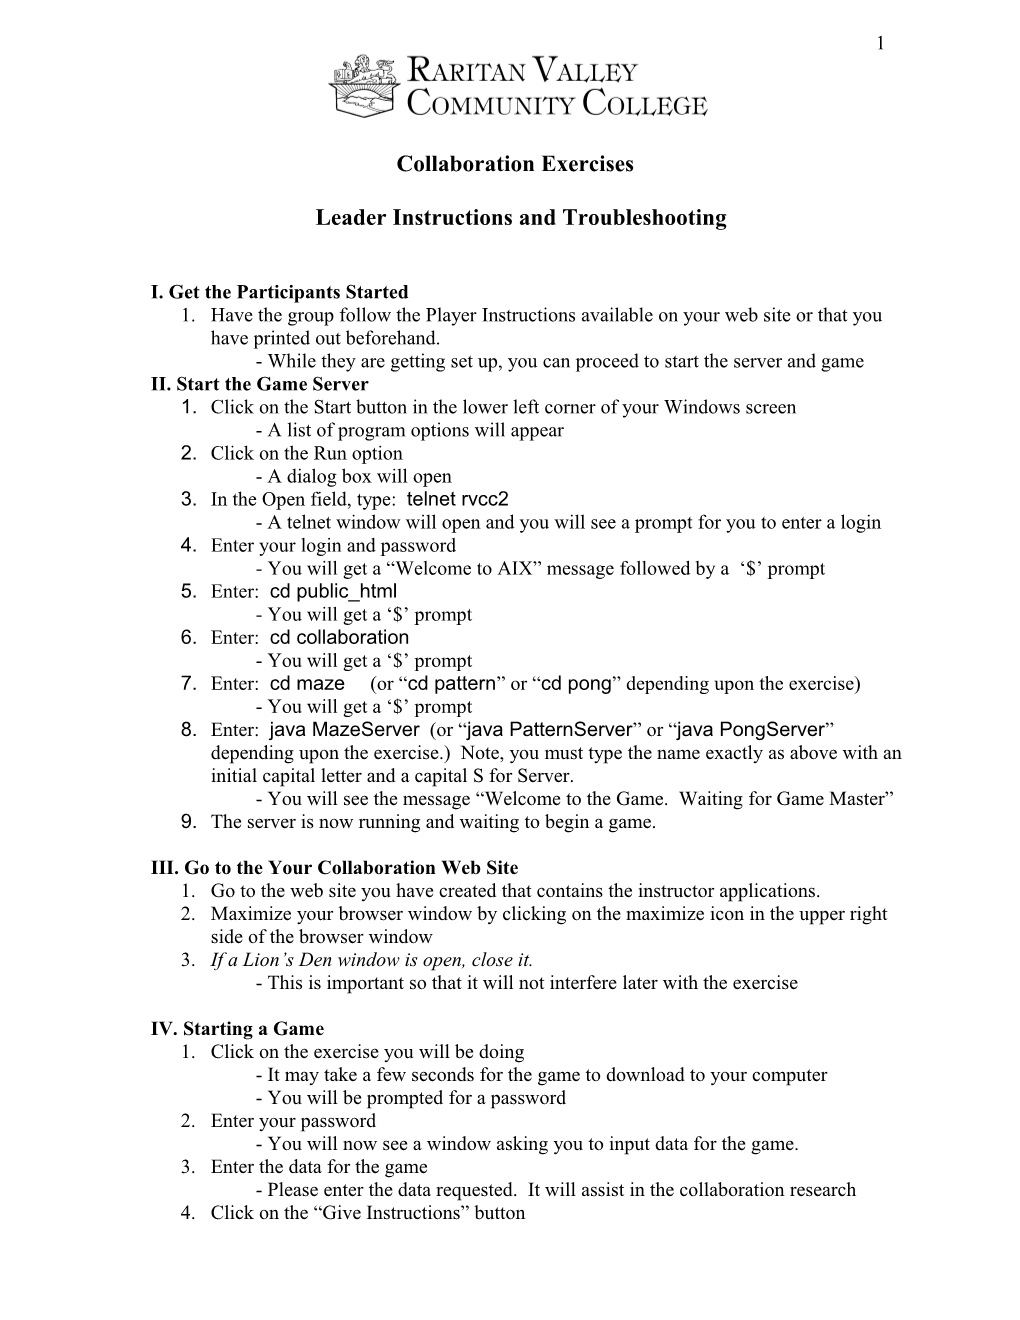 Leader Instructions and Troubleshooting